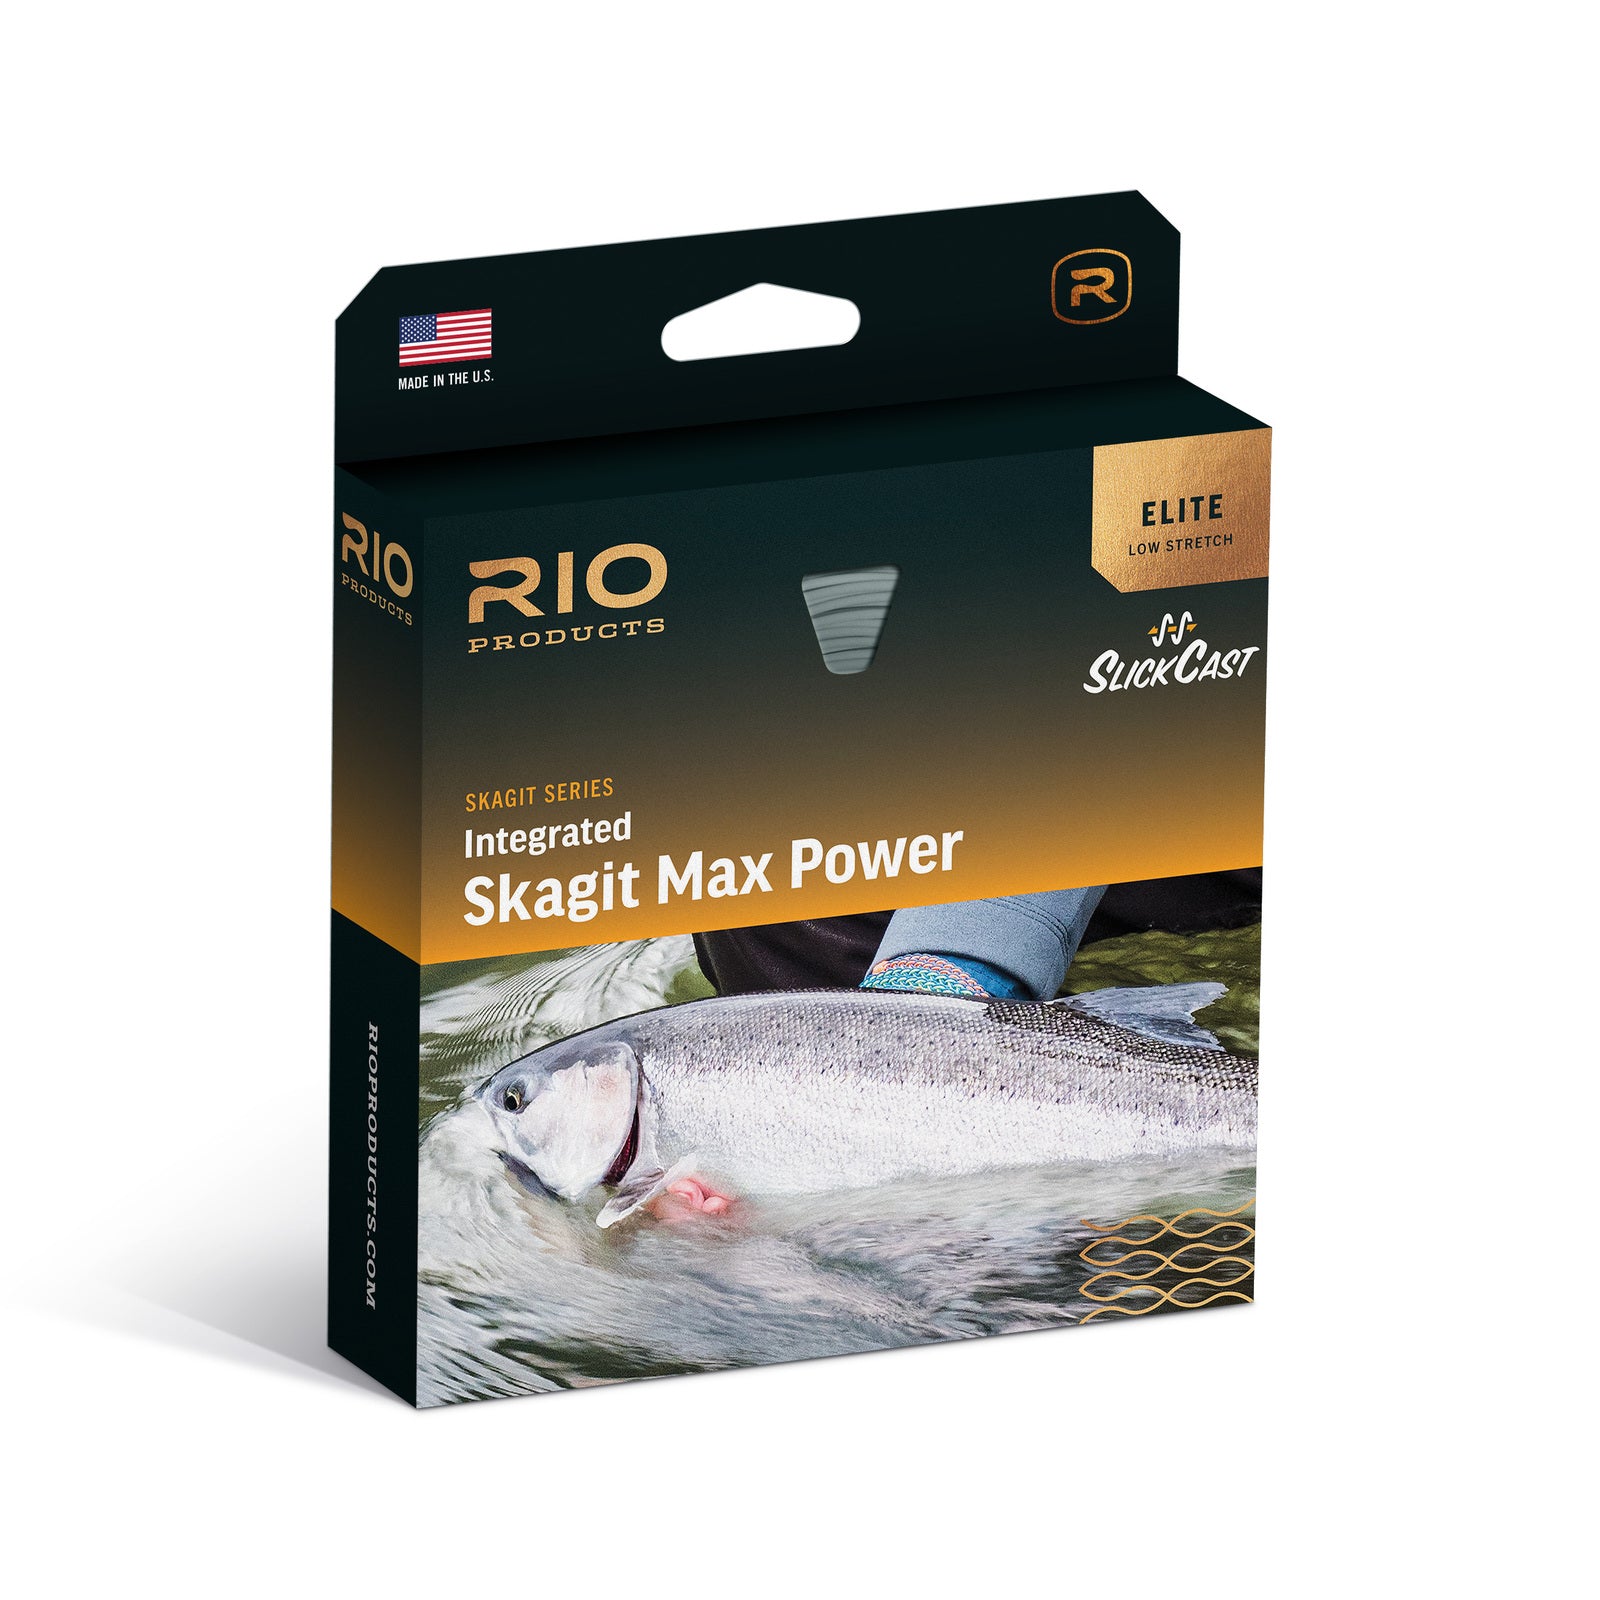 Rio InTouch Skagit Trout Spey - Bend Fly Shop